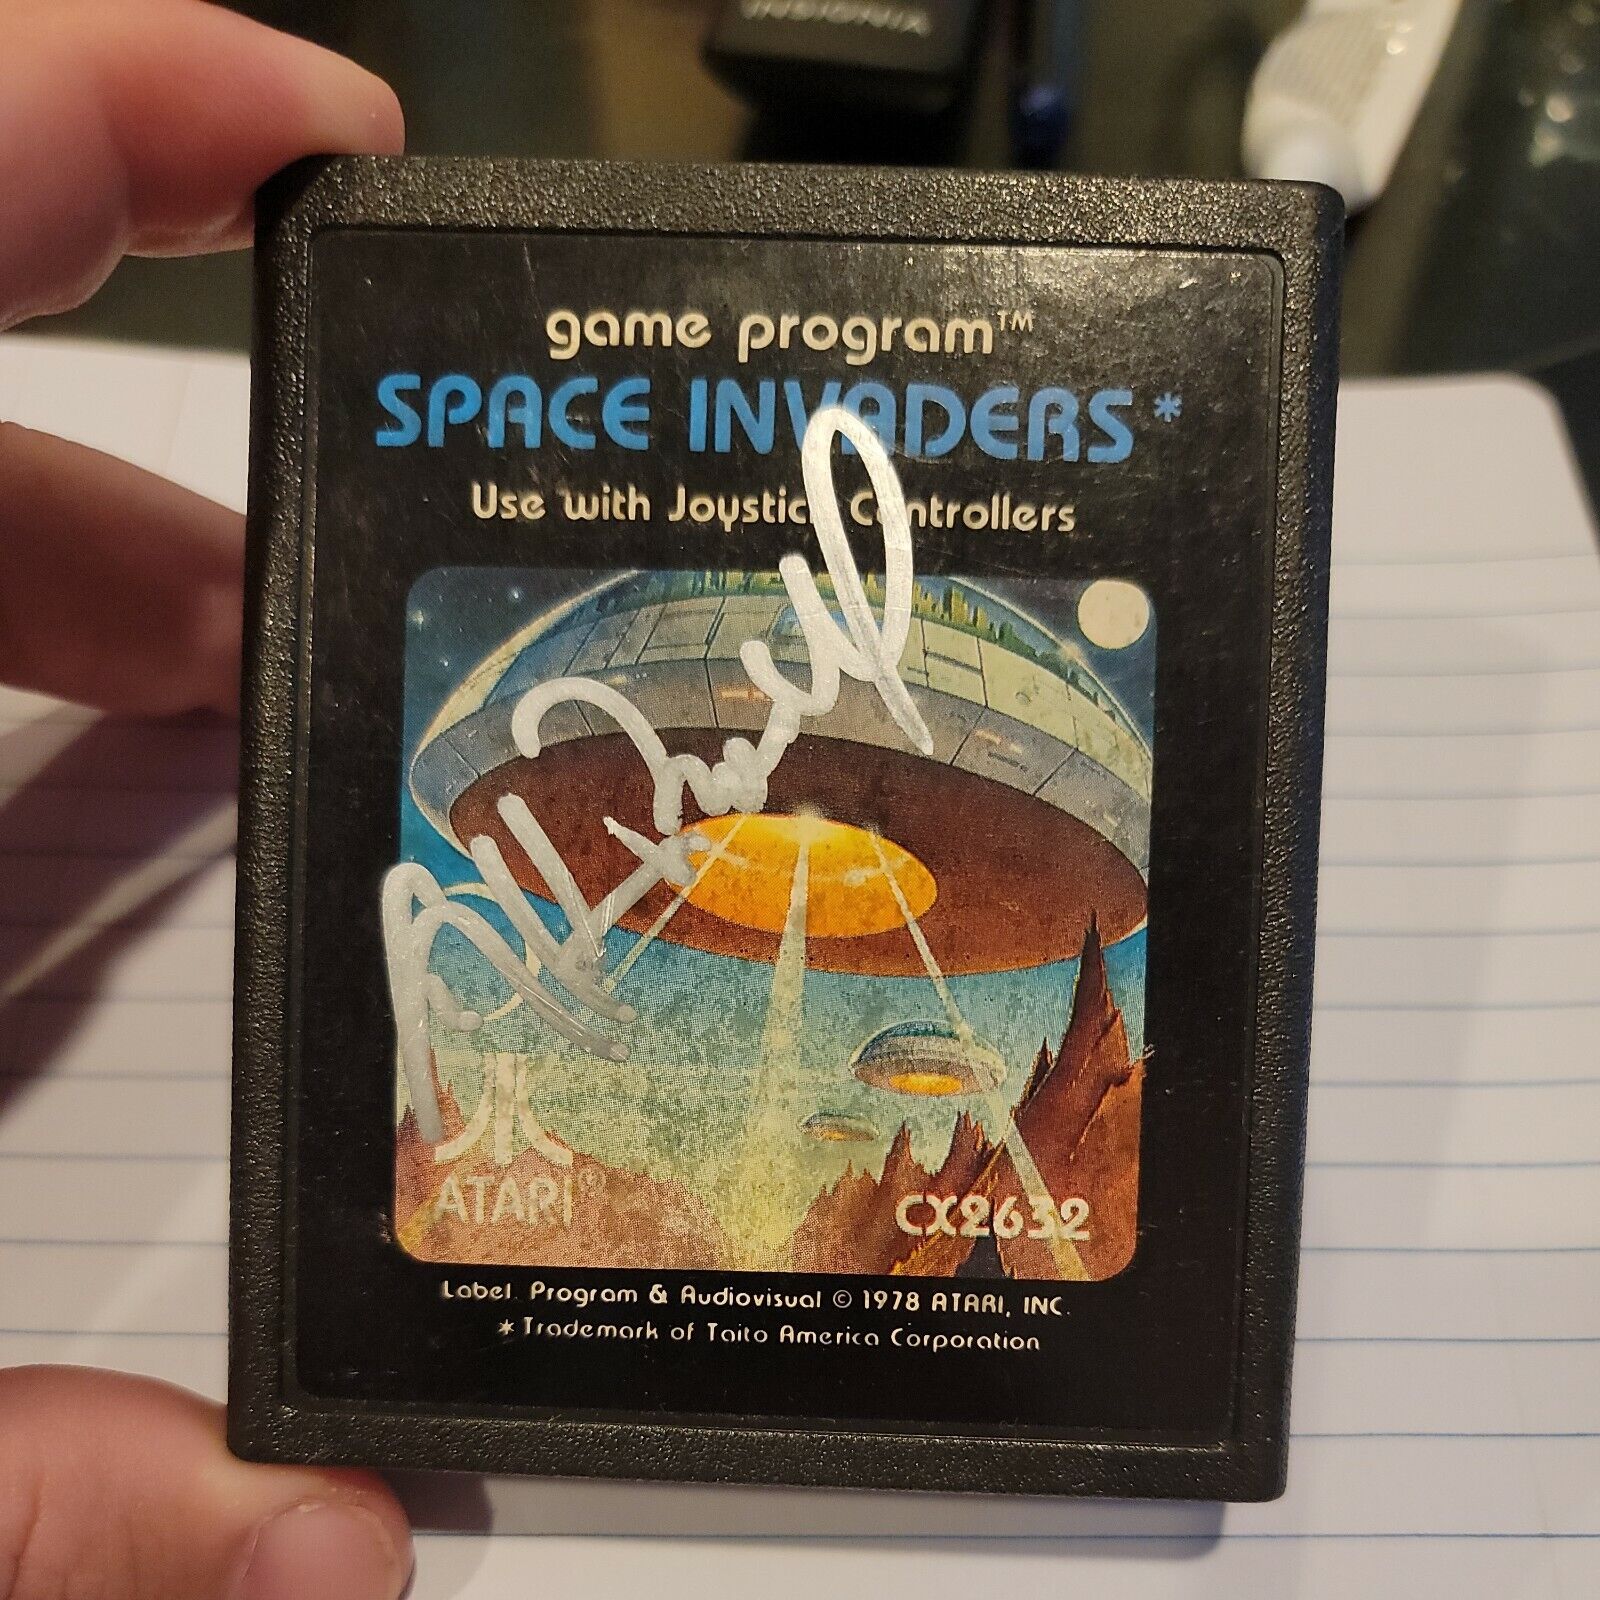 Nolan Bushnell signed autographed Atari 2600 Space invaders video game cartridge